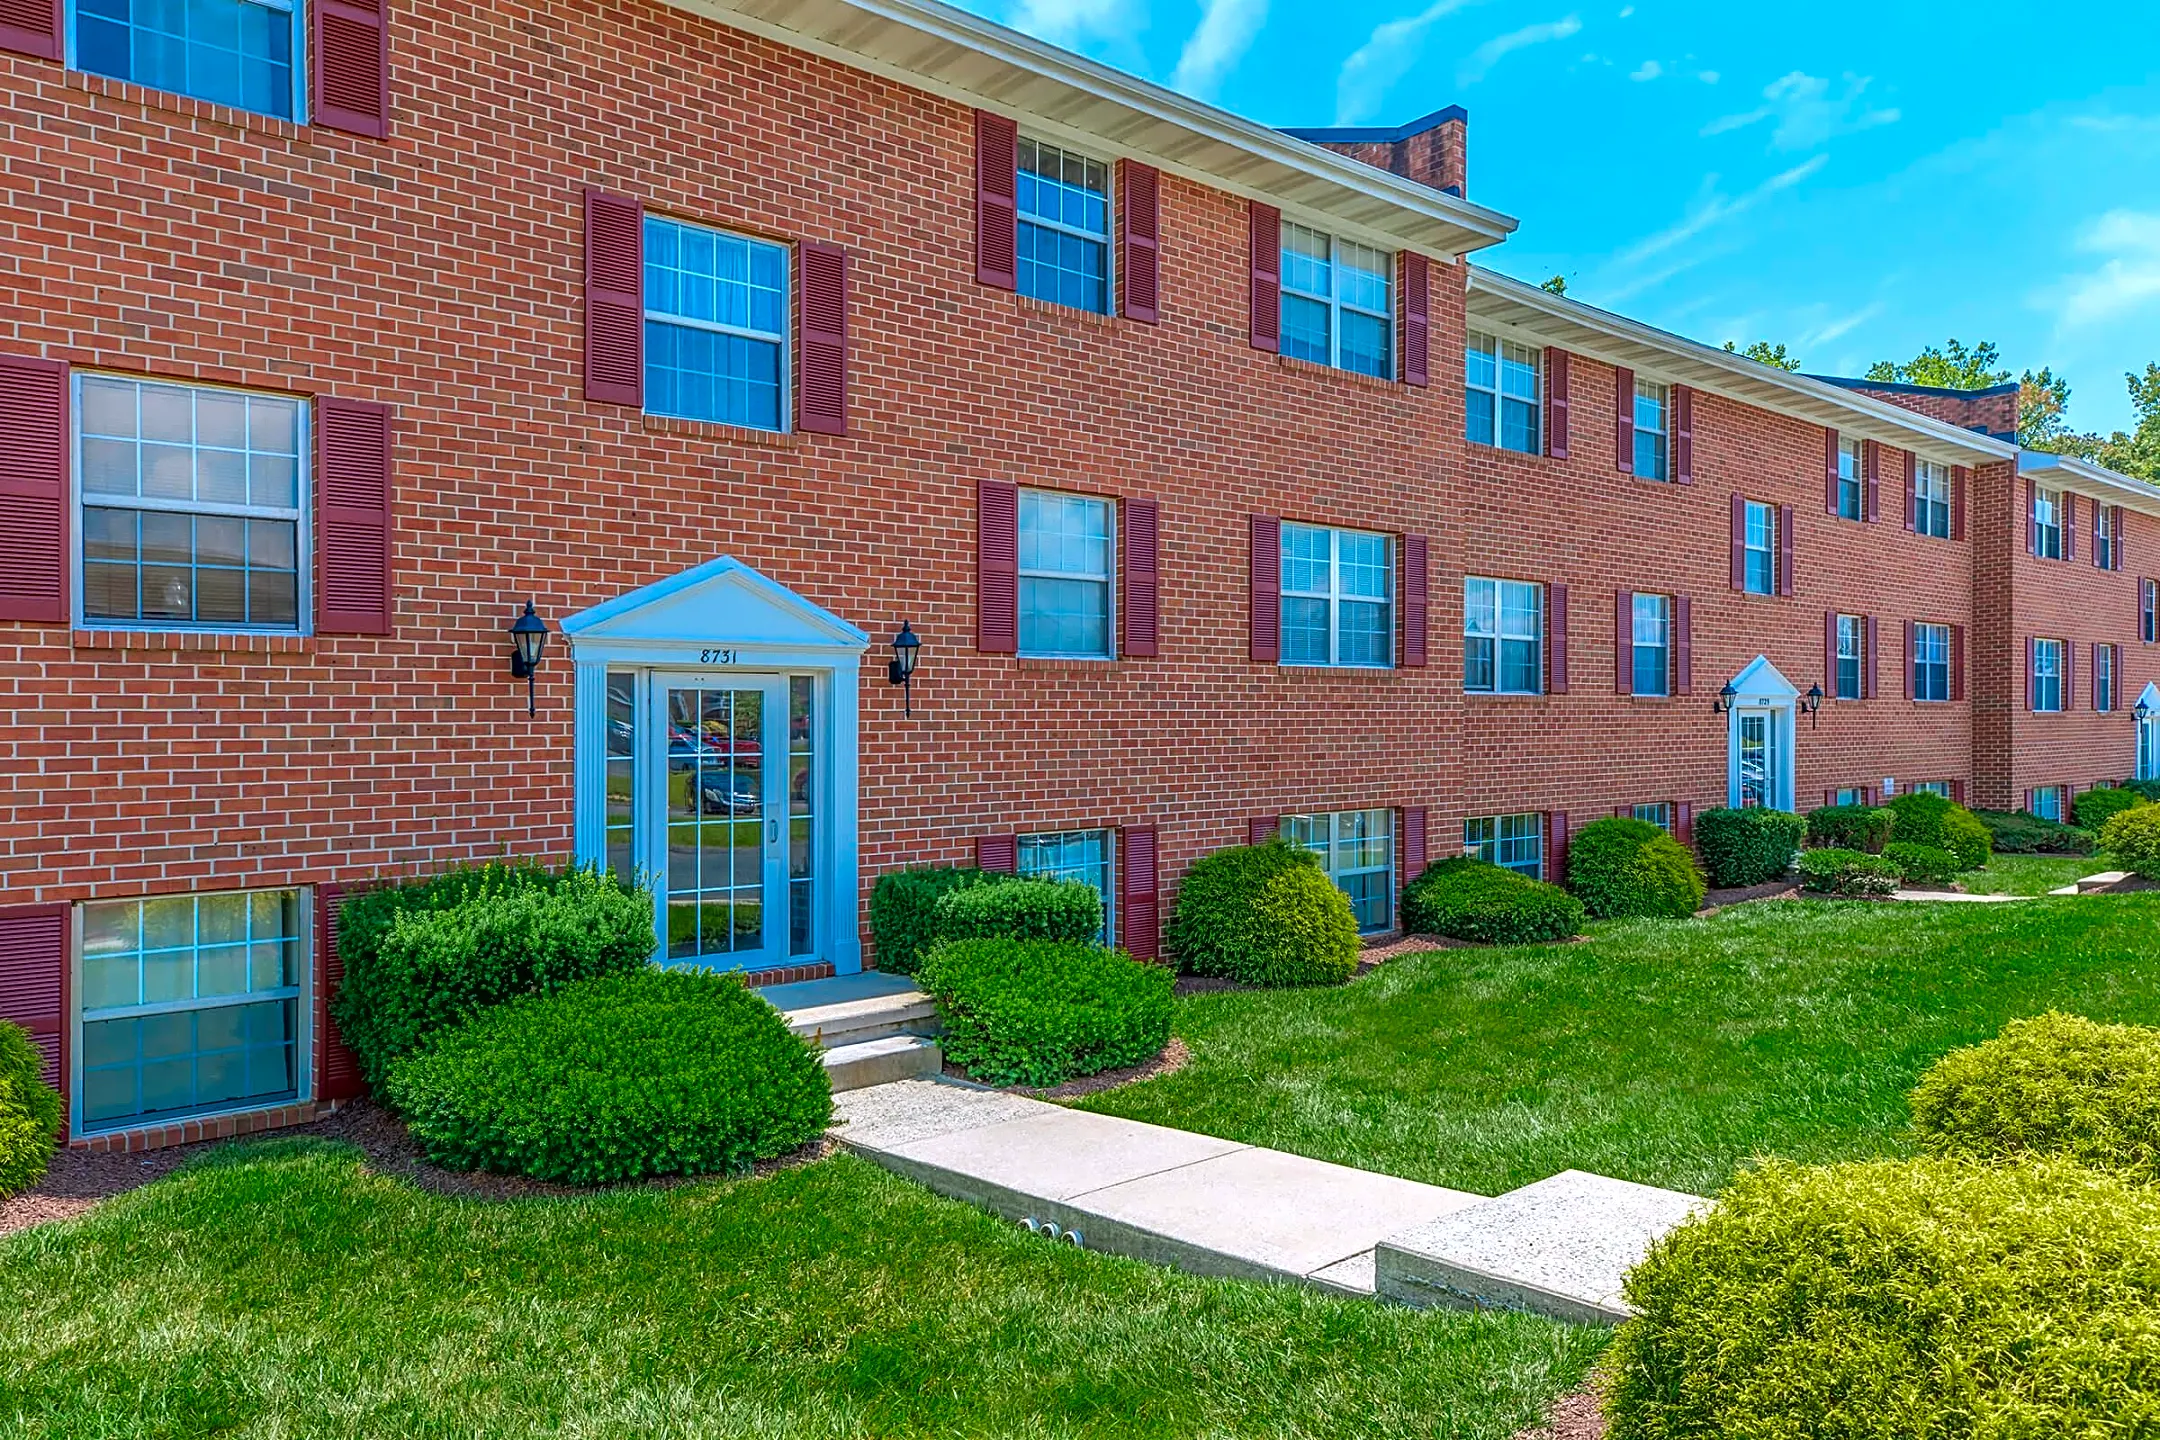 Building - Perry Hall Apartments - Nottingham, MD